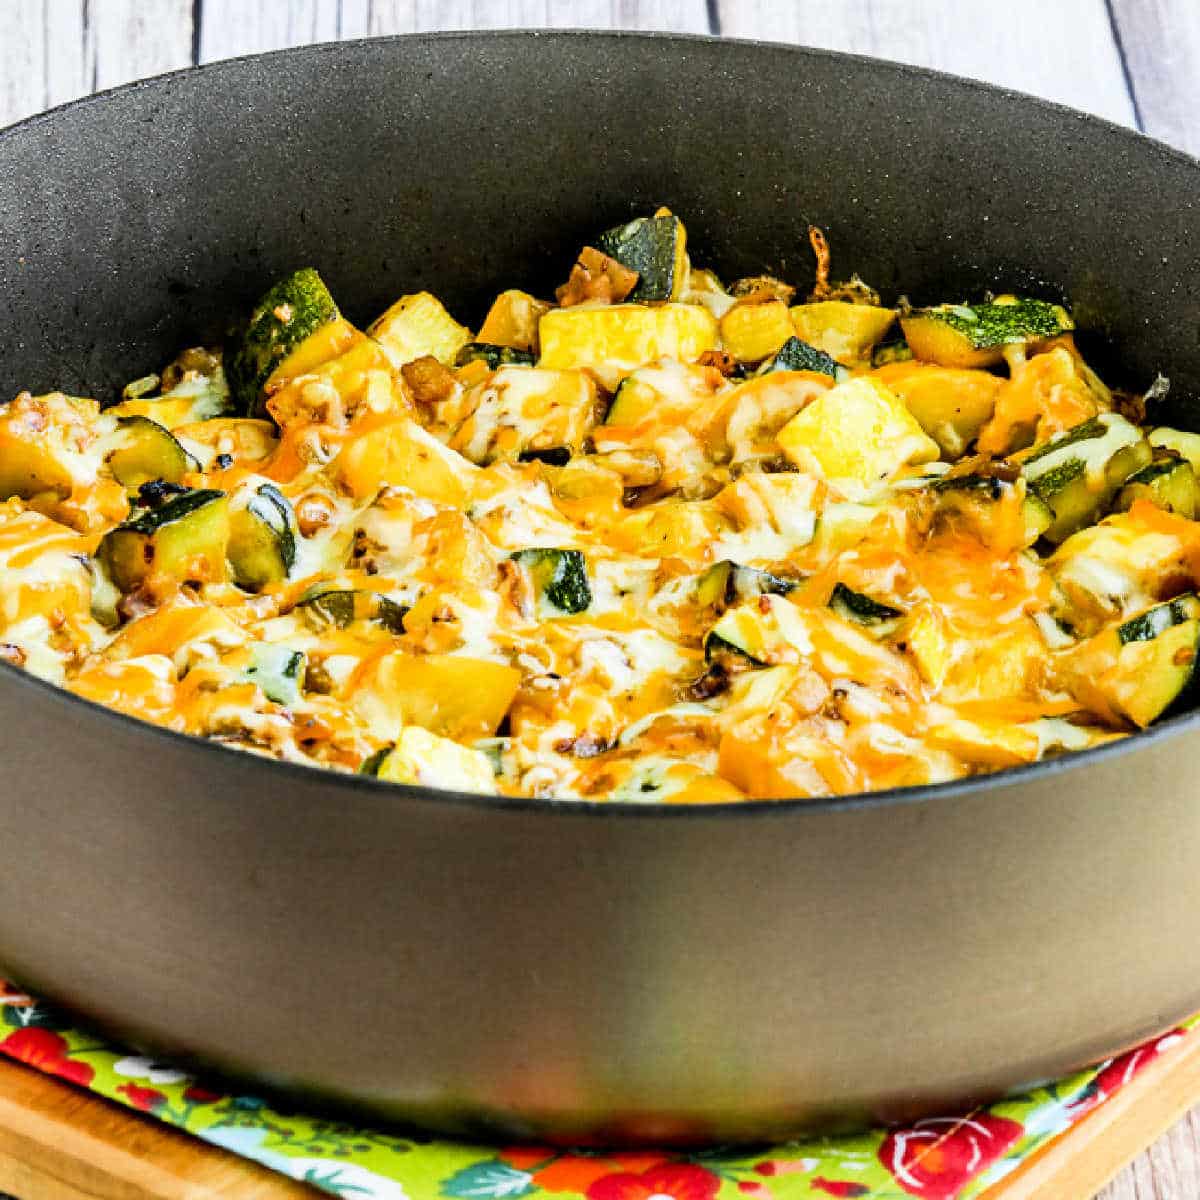 Cheesy Calabacitas shown in frying pan with melted cheese on top.